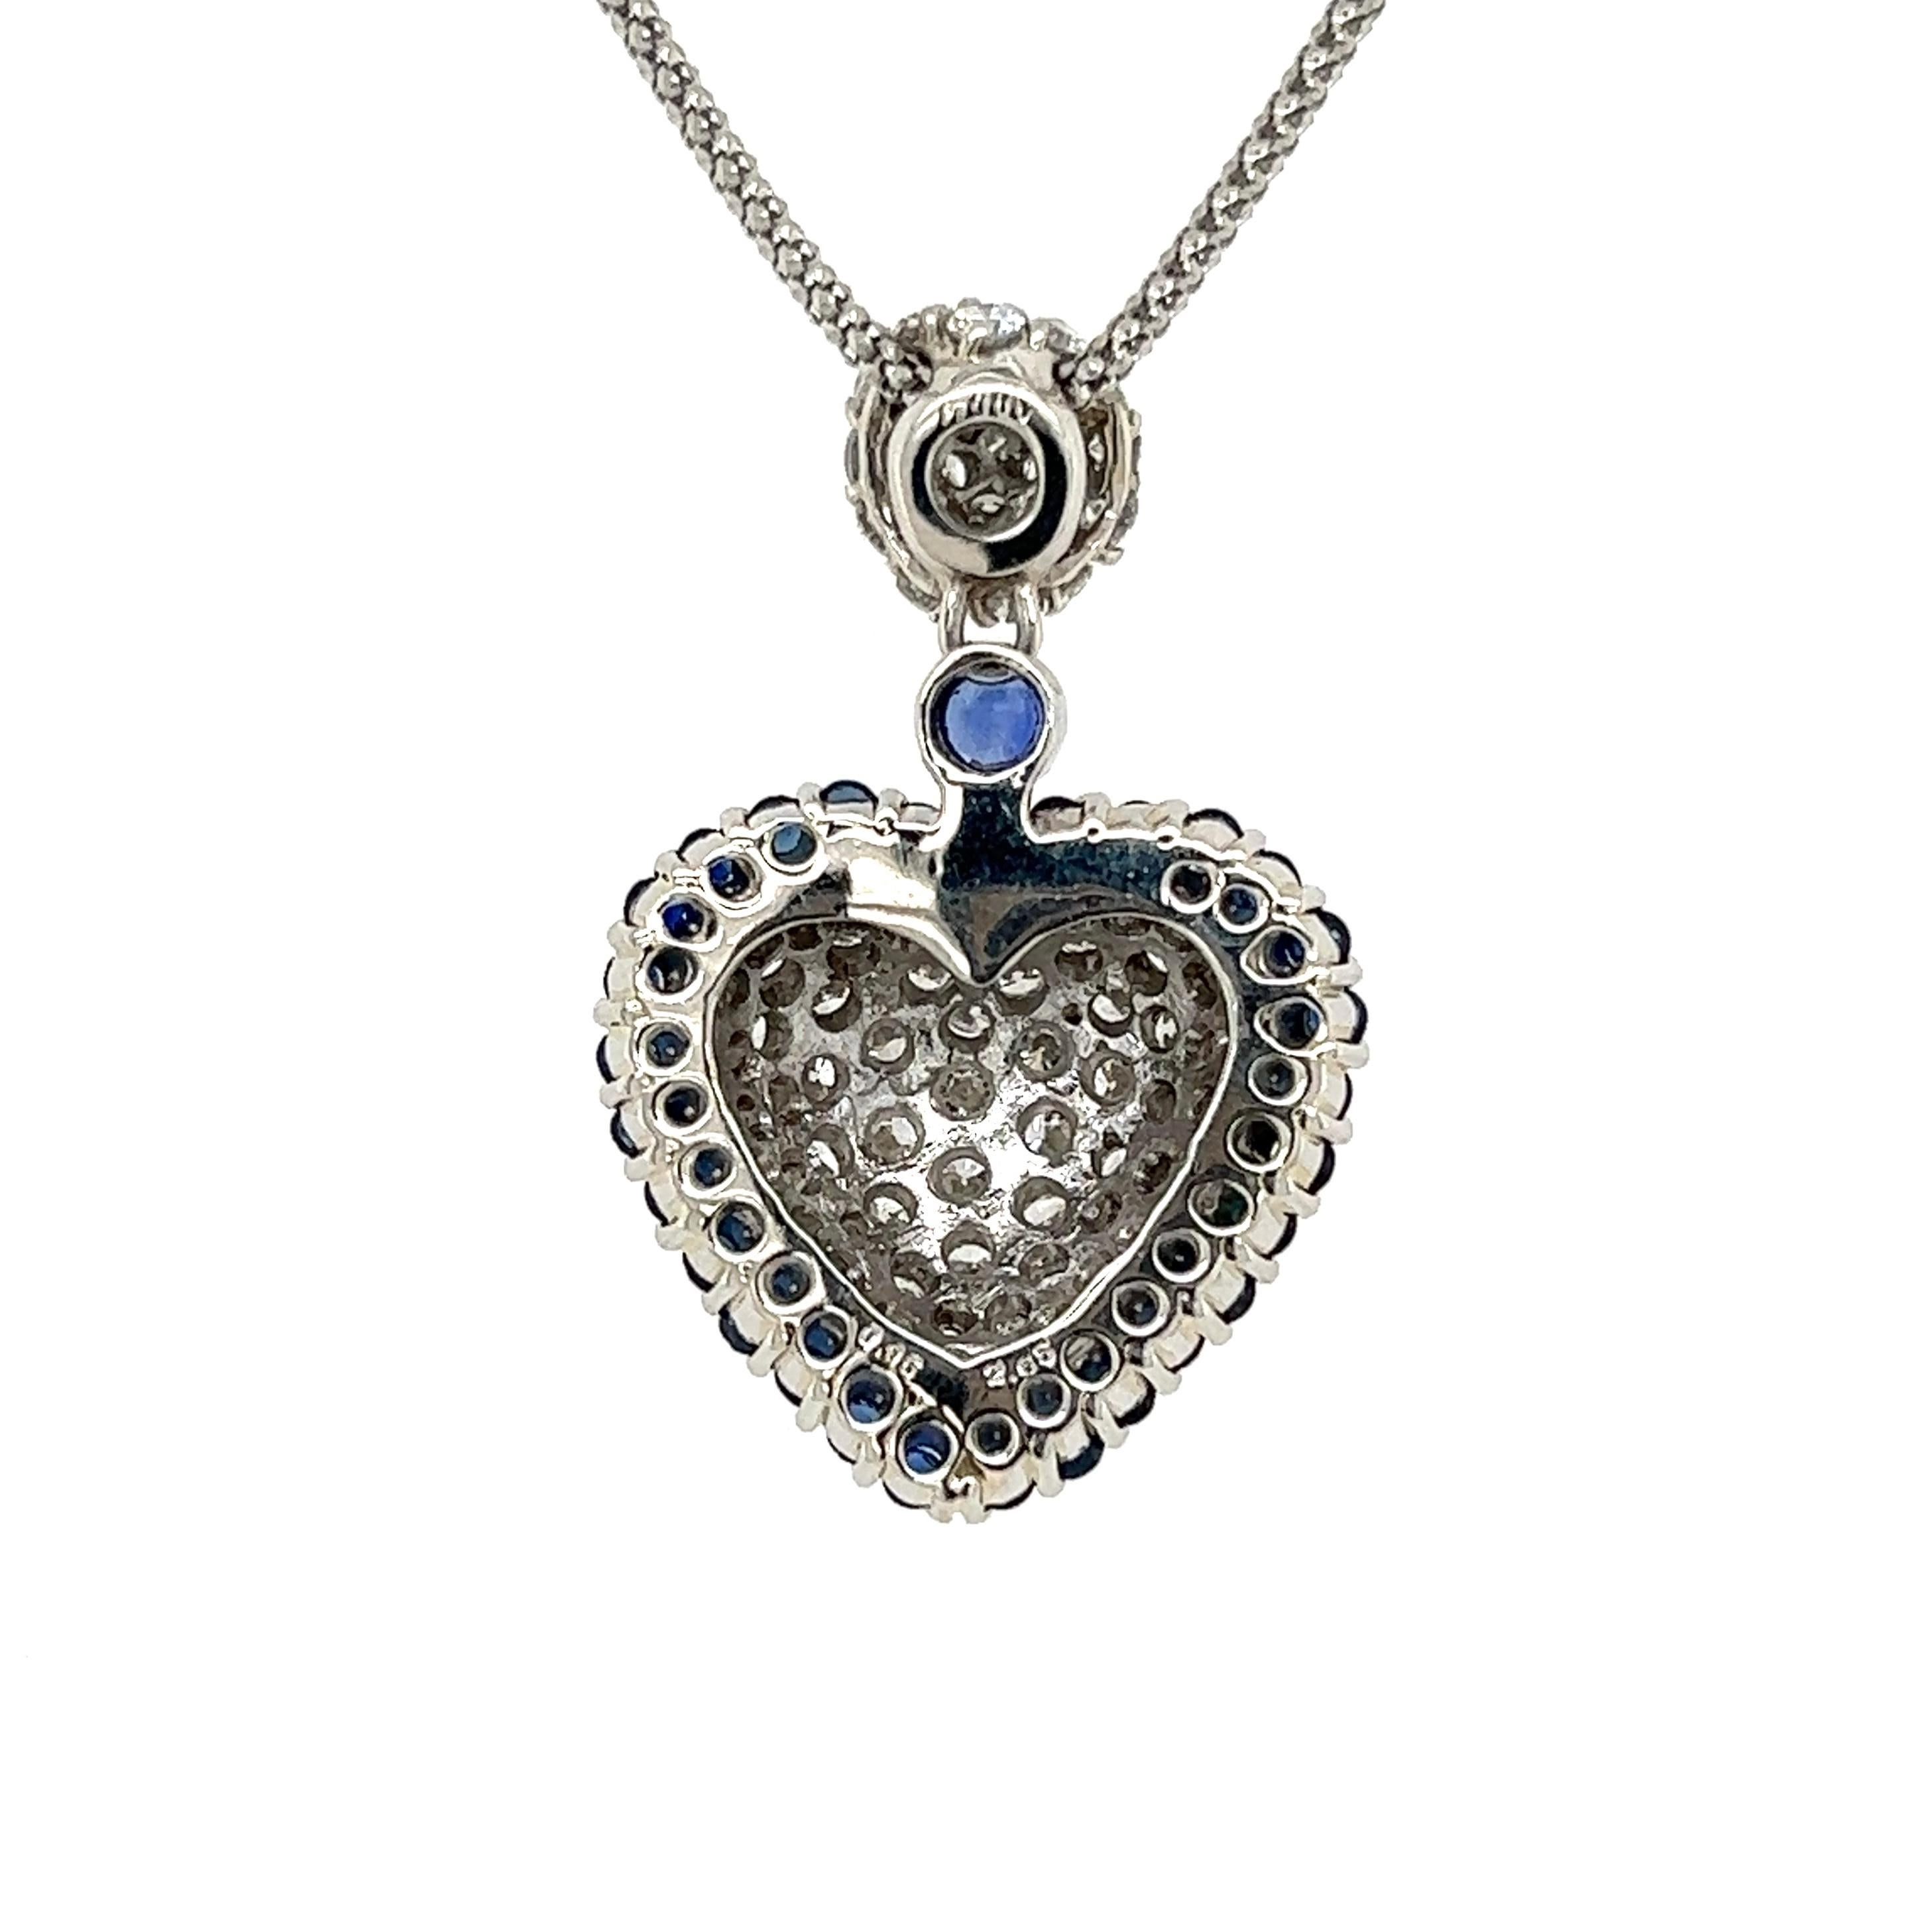 Pave Diamond and Sapphire Halo Heart Pendant Necklace Estate Fine Jewelry In Excellent Condition For Sale In Montreal, QC